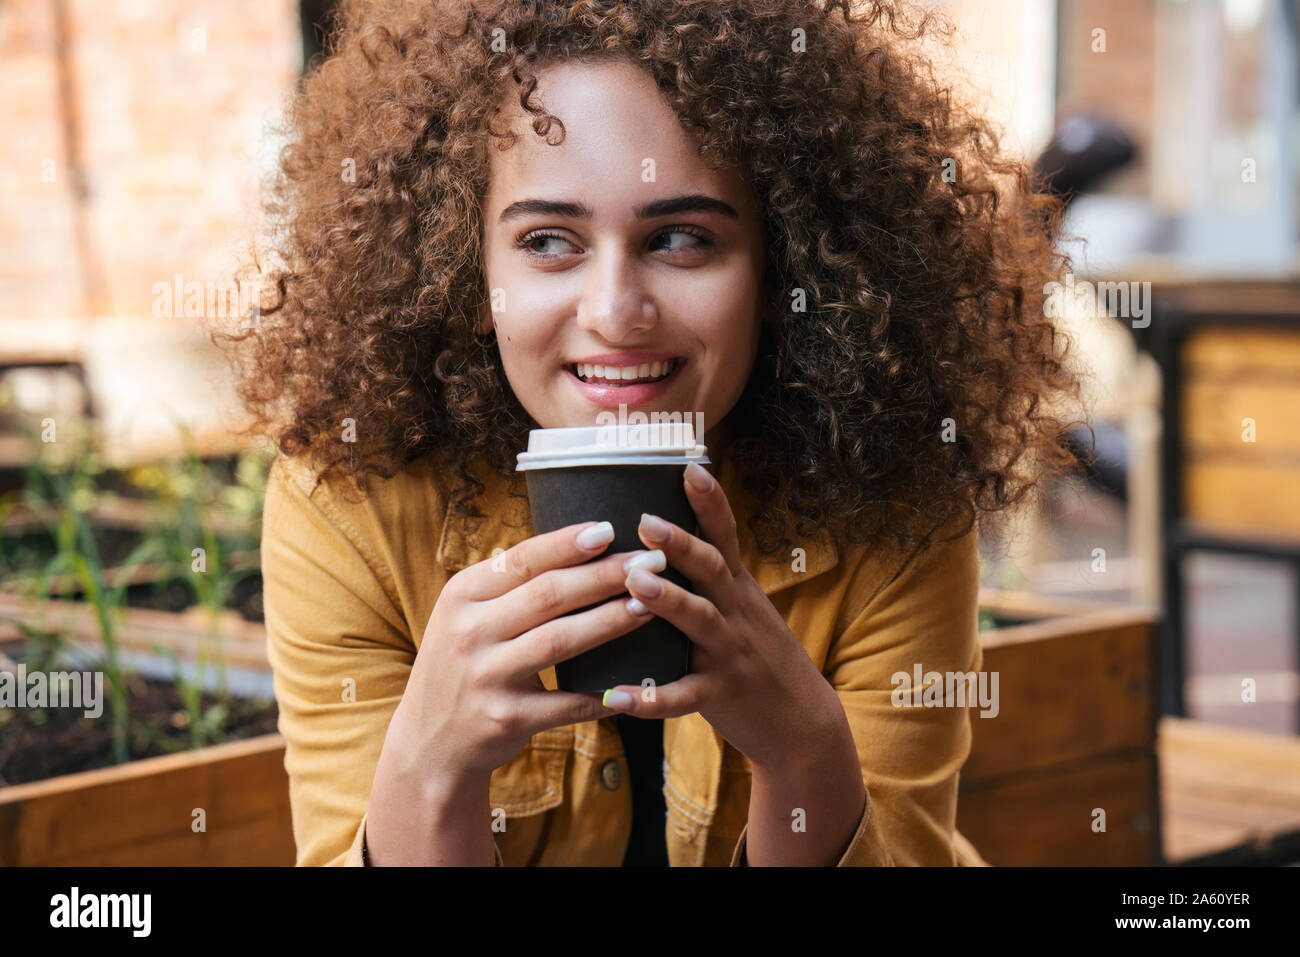 Portrait of smiling teenage girl drinking coffee to go outdoors Stock Photo